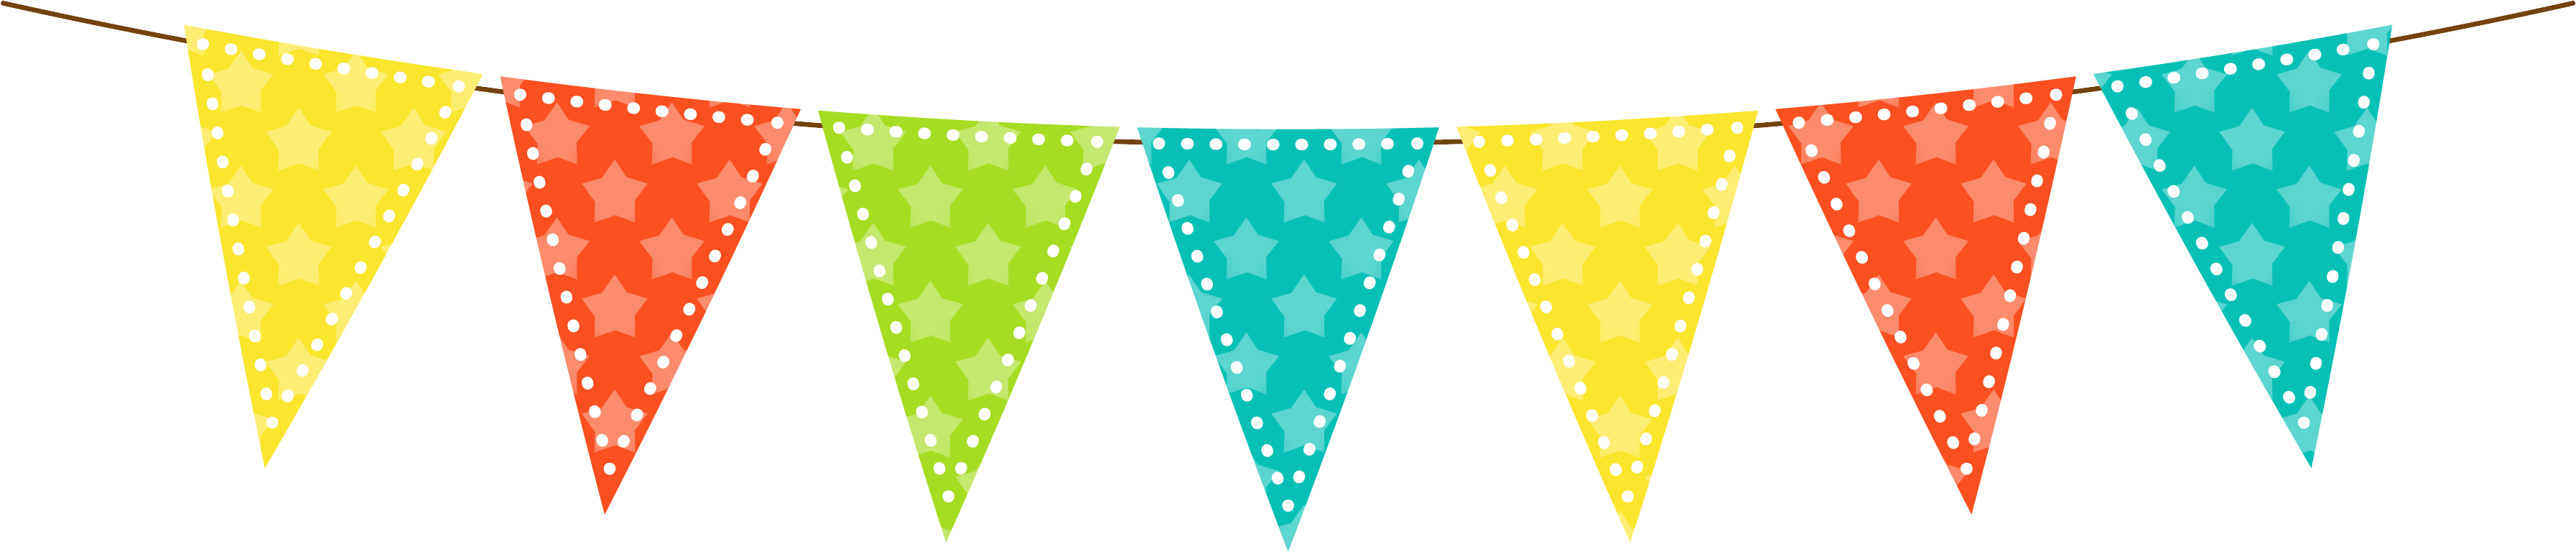 Free Bunting Png Download Free Bunting Png Png Images Free Cliparts On Clipart Library